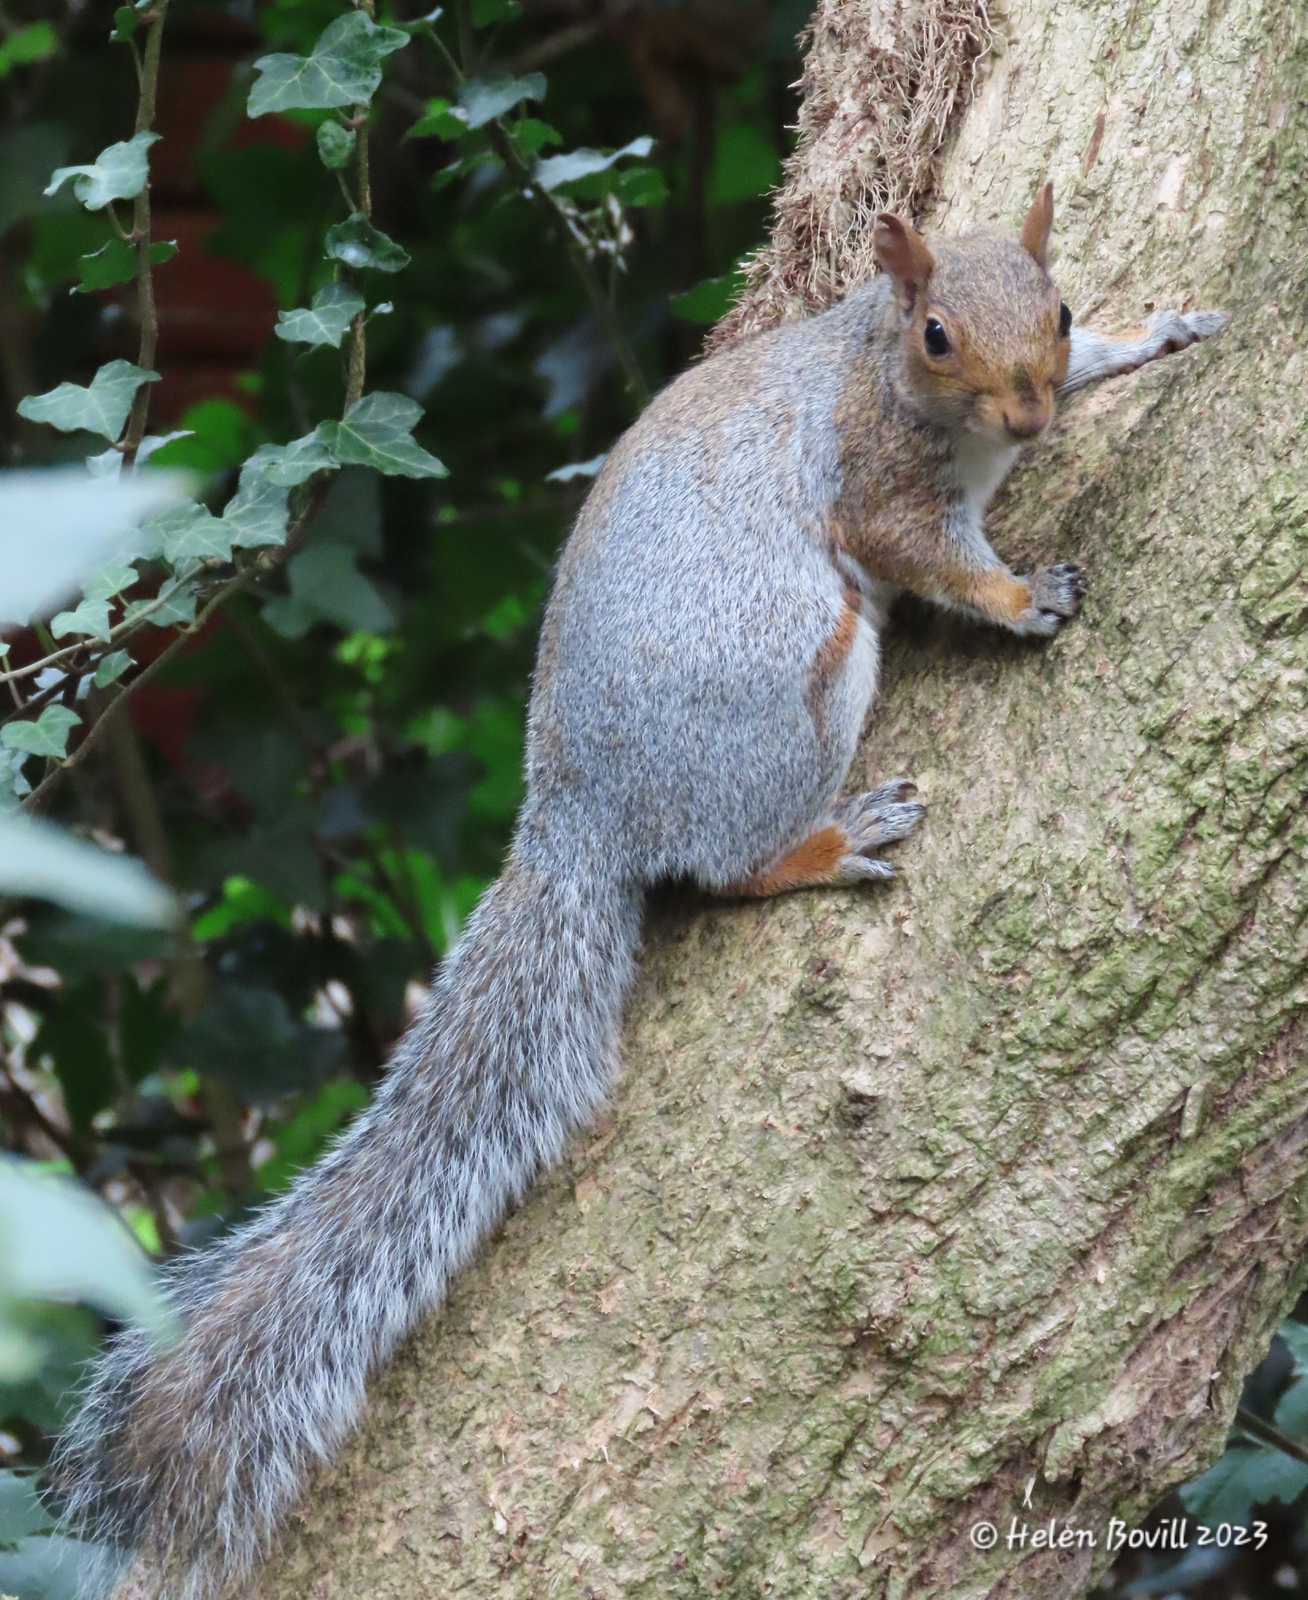 A Grey Squirrel climbing up a tree in the cemetery